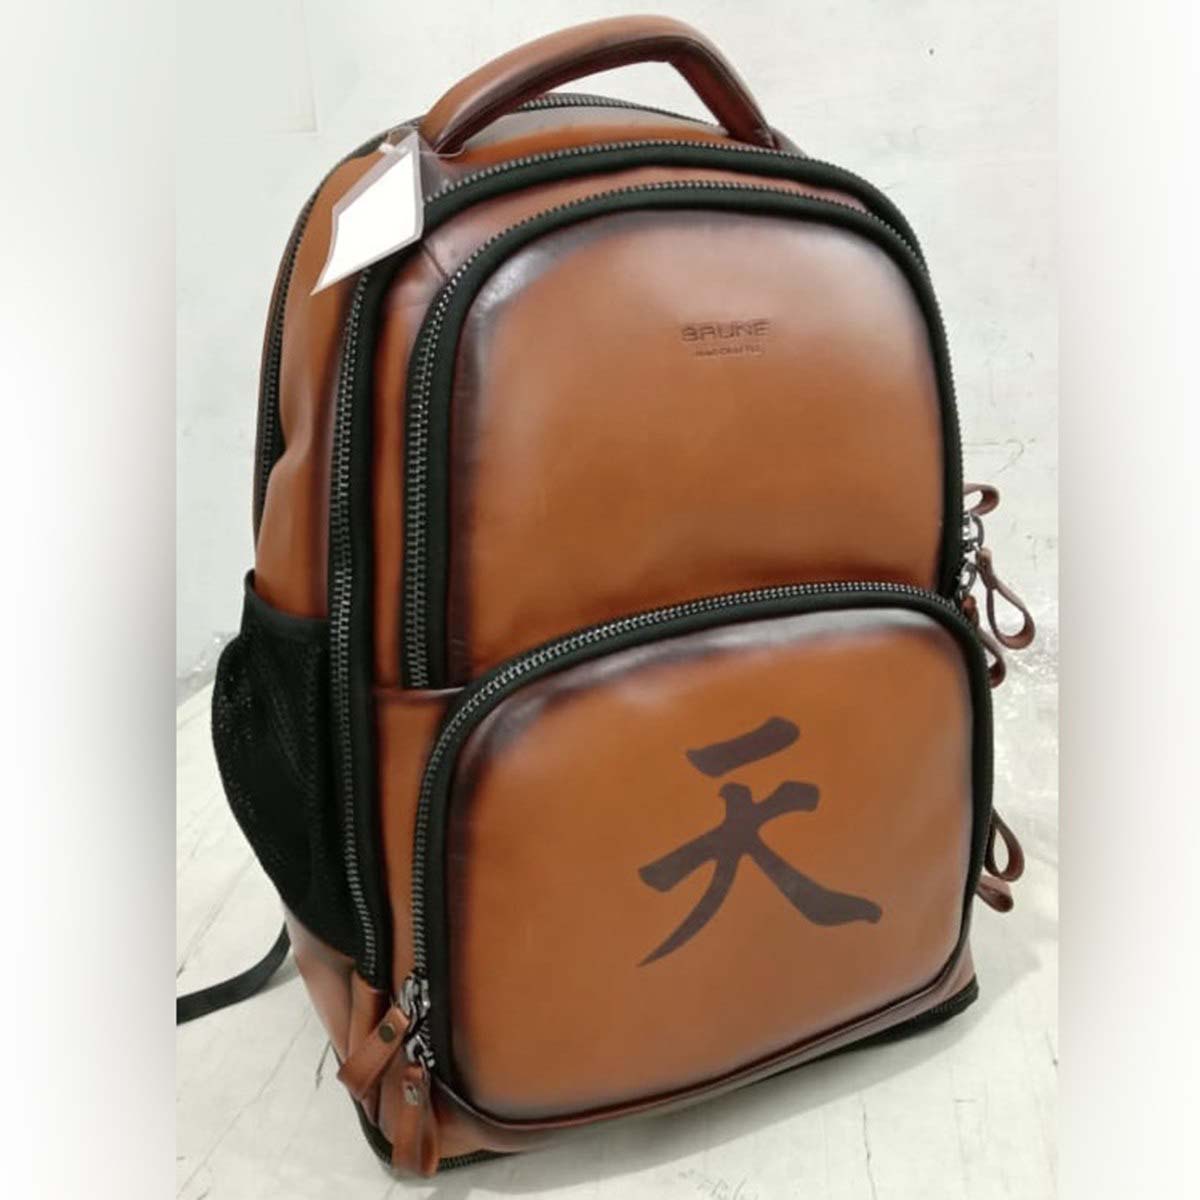 Customized Tan Leather Backpack with Your Language Name Initials by Brune & Bareskin